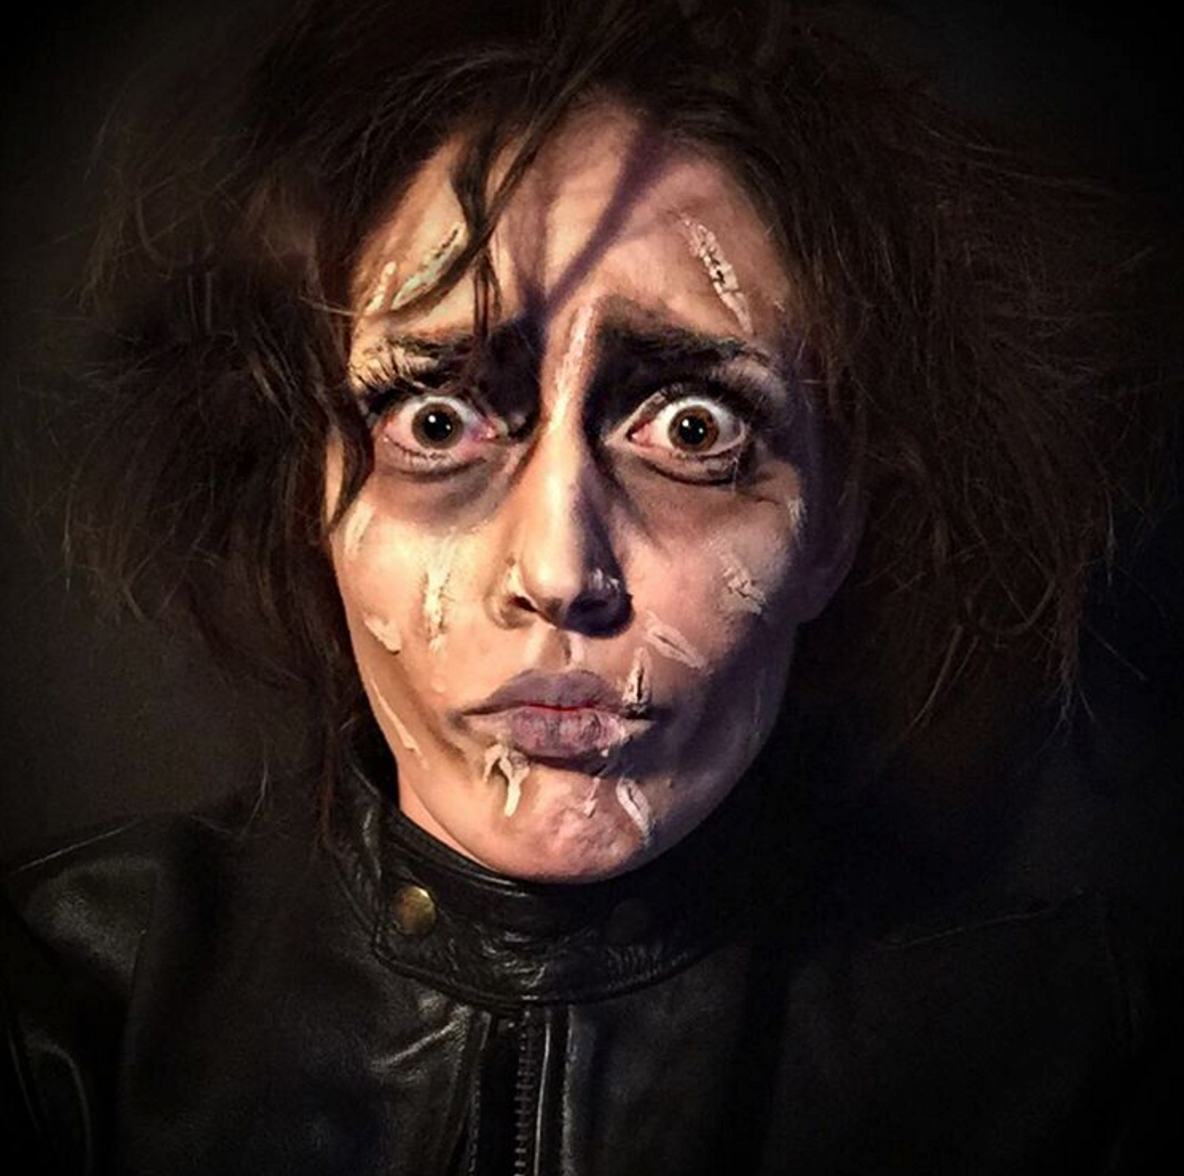 Makeup artist proves she can transform into ANY fictional